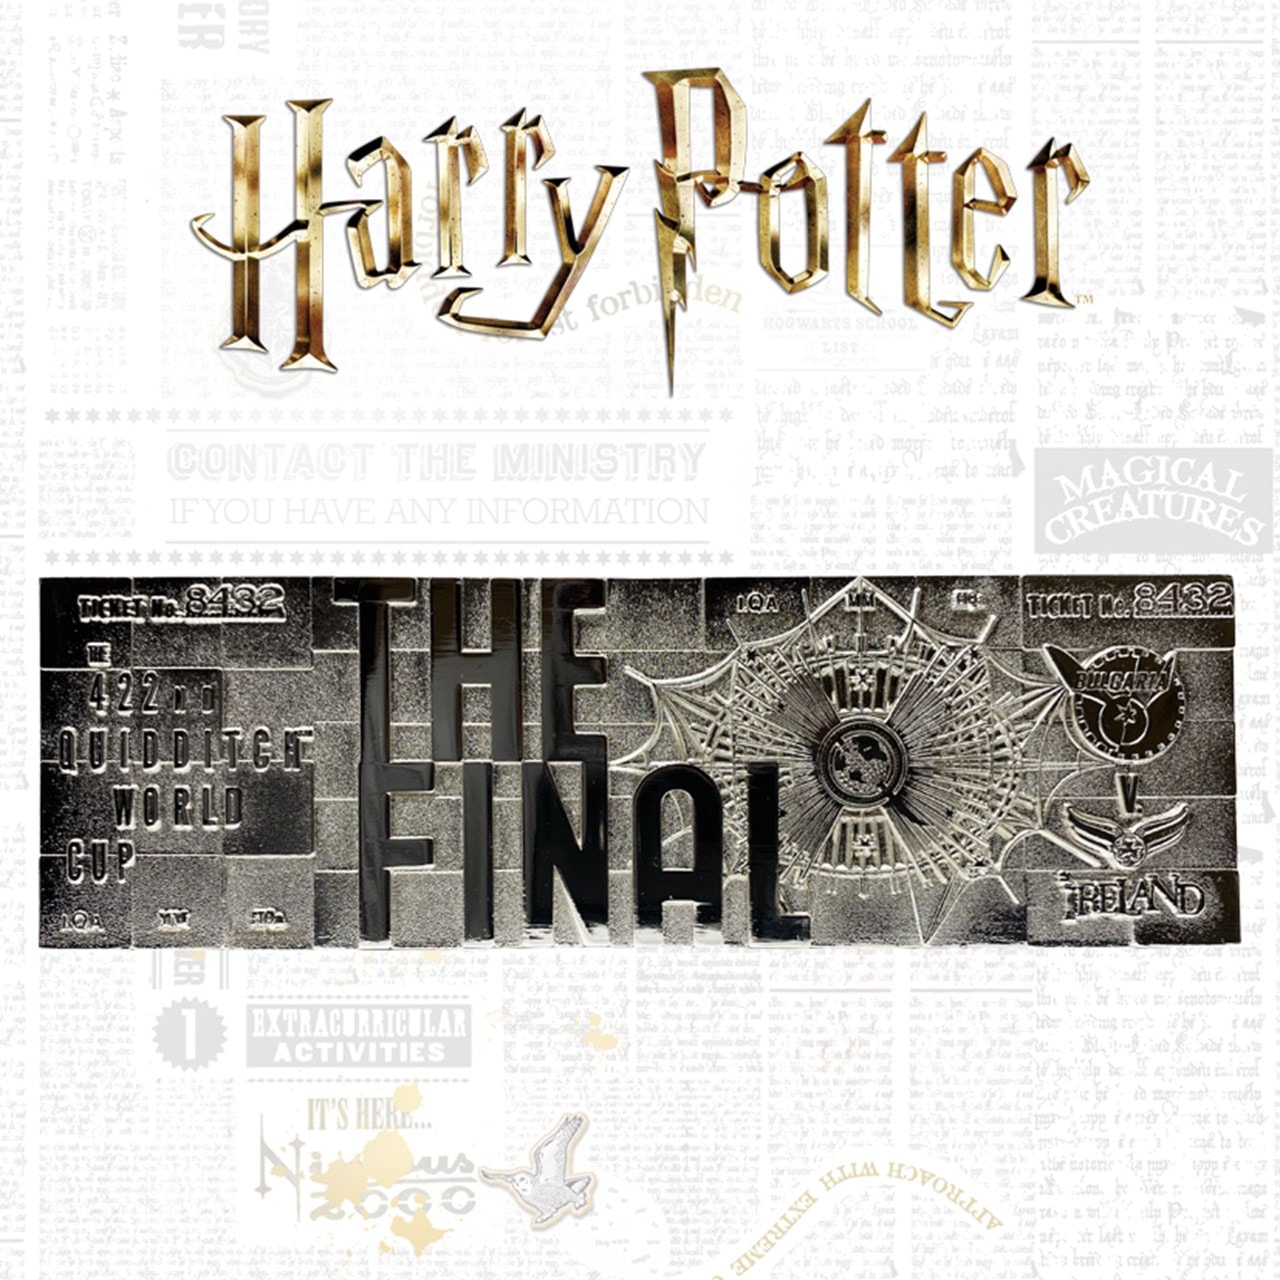 Harry Potter Quidditch World Cup Ticket Metal Replica Online Only Pop Culture Accessories Free Shipping Over Hmv Store